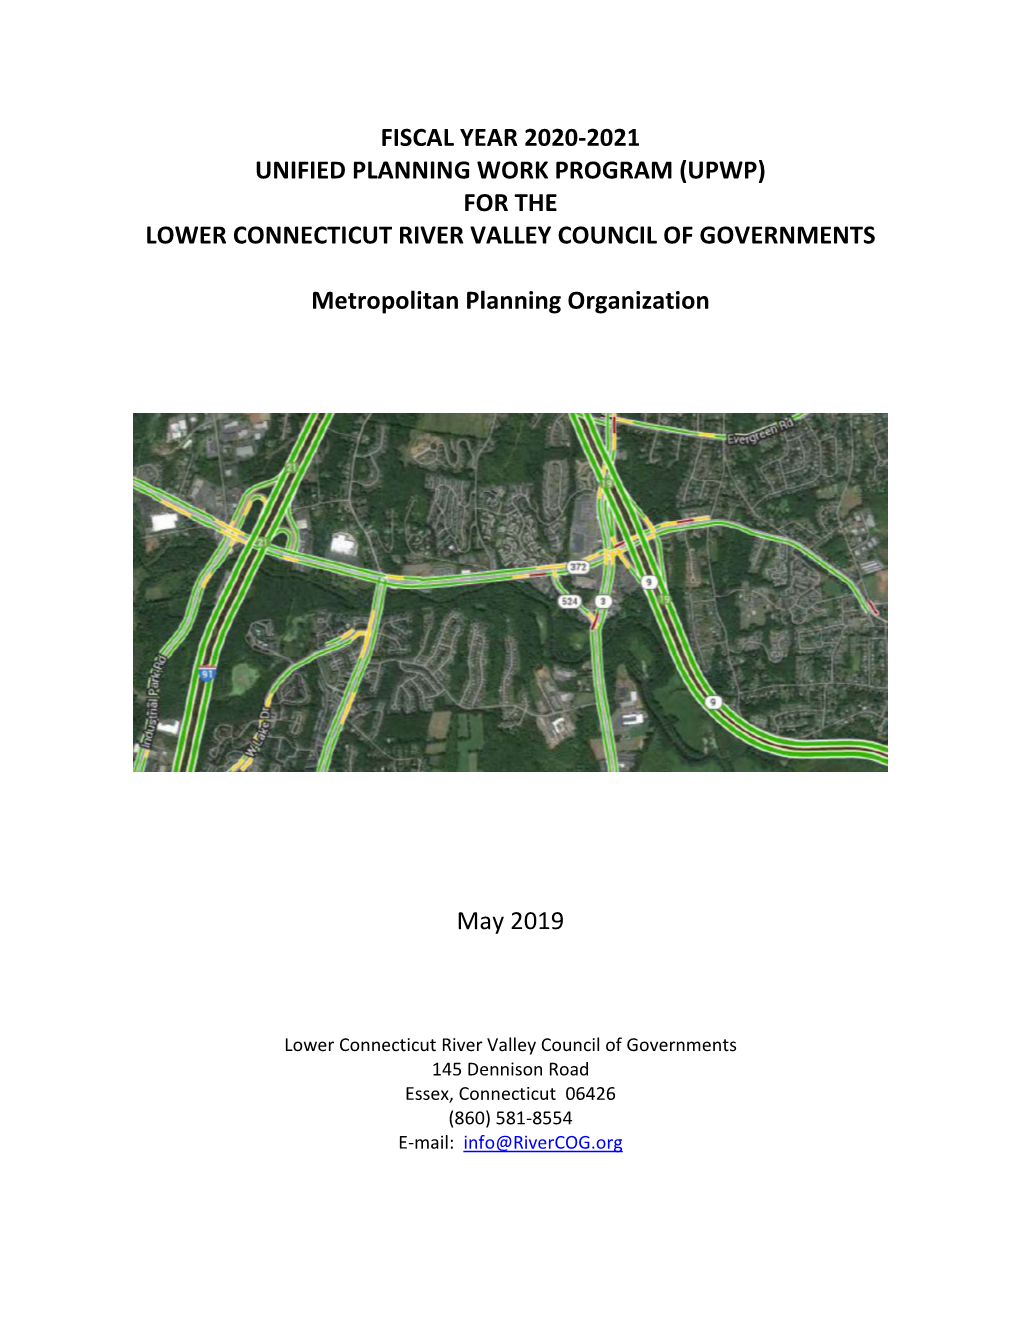 Fiscal Year 2020-2021 Unified Planning Work Program (Upwp) for the Lower Connecticut River Valley Council of Governments